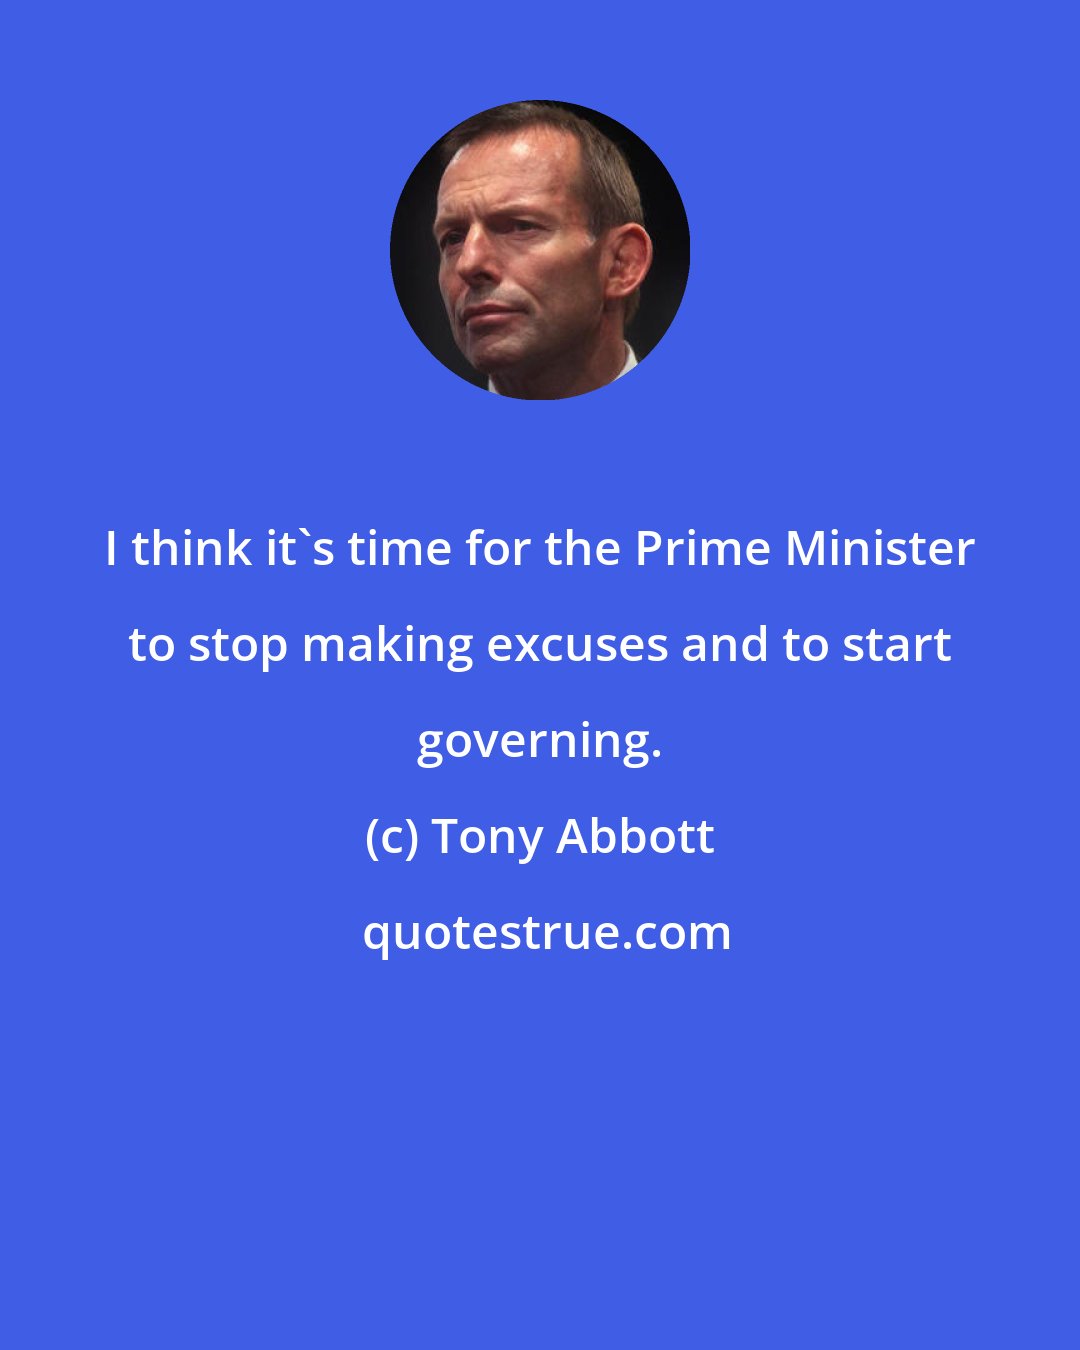 Tony Abbott: I think it's time for the Prime Minister to stop making excuses and to start governing.